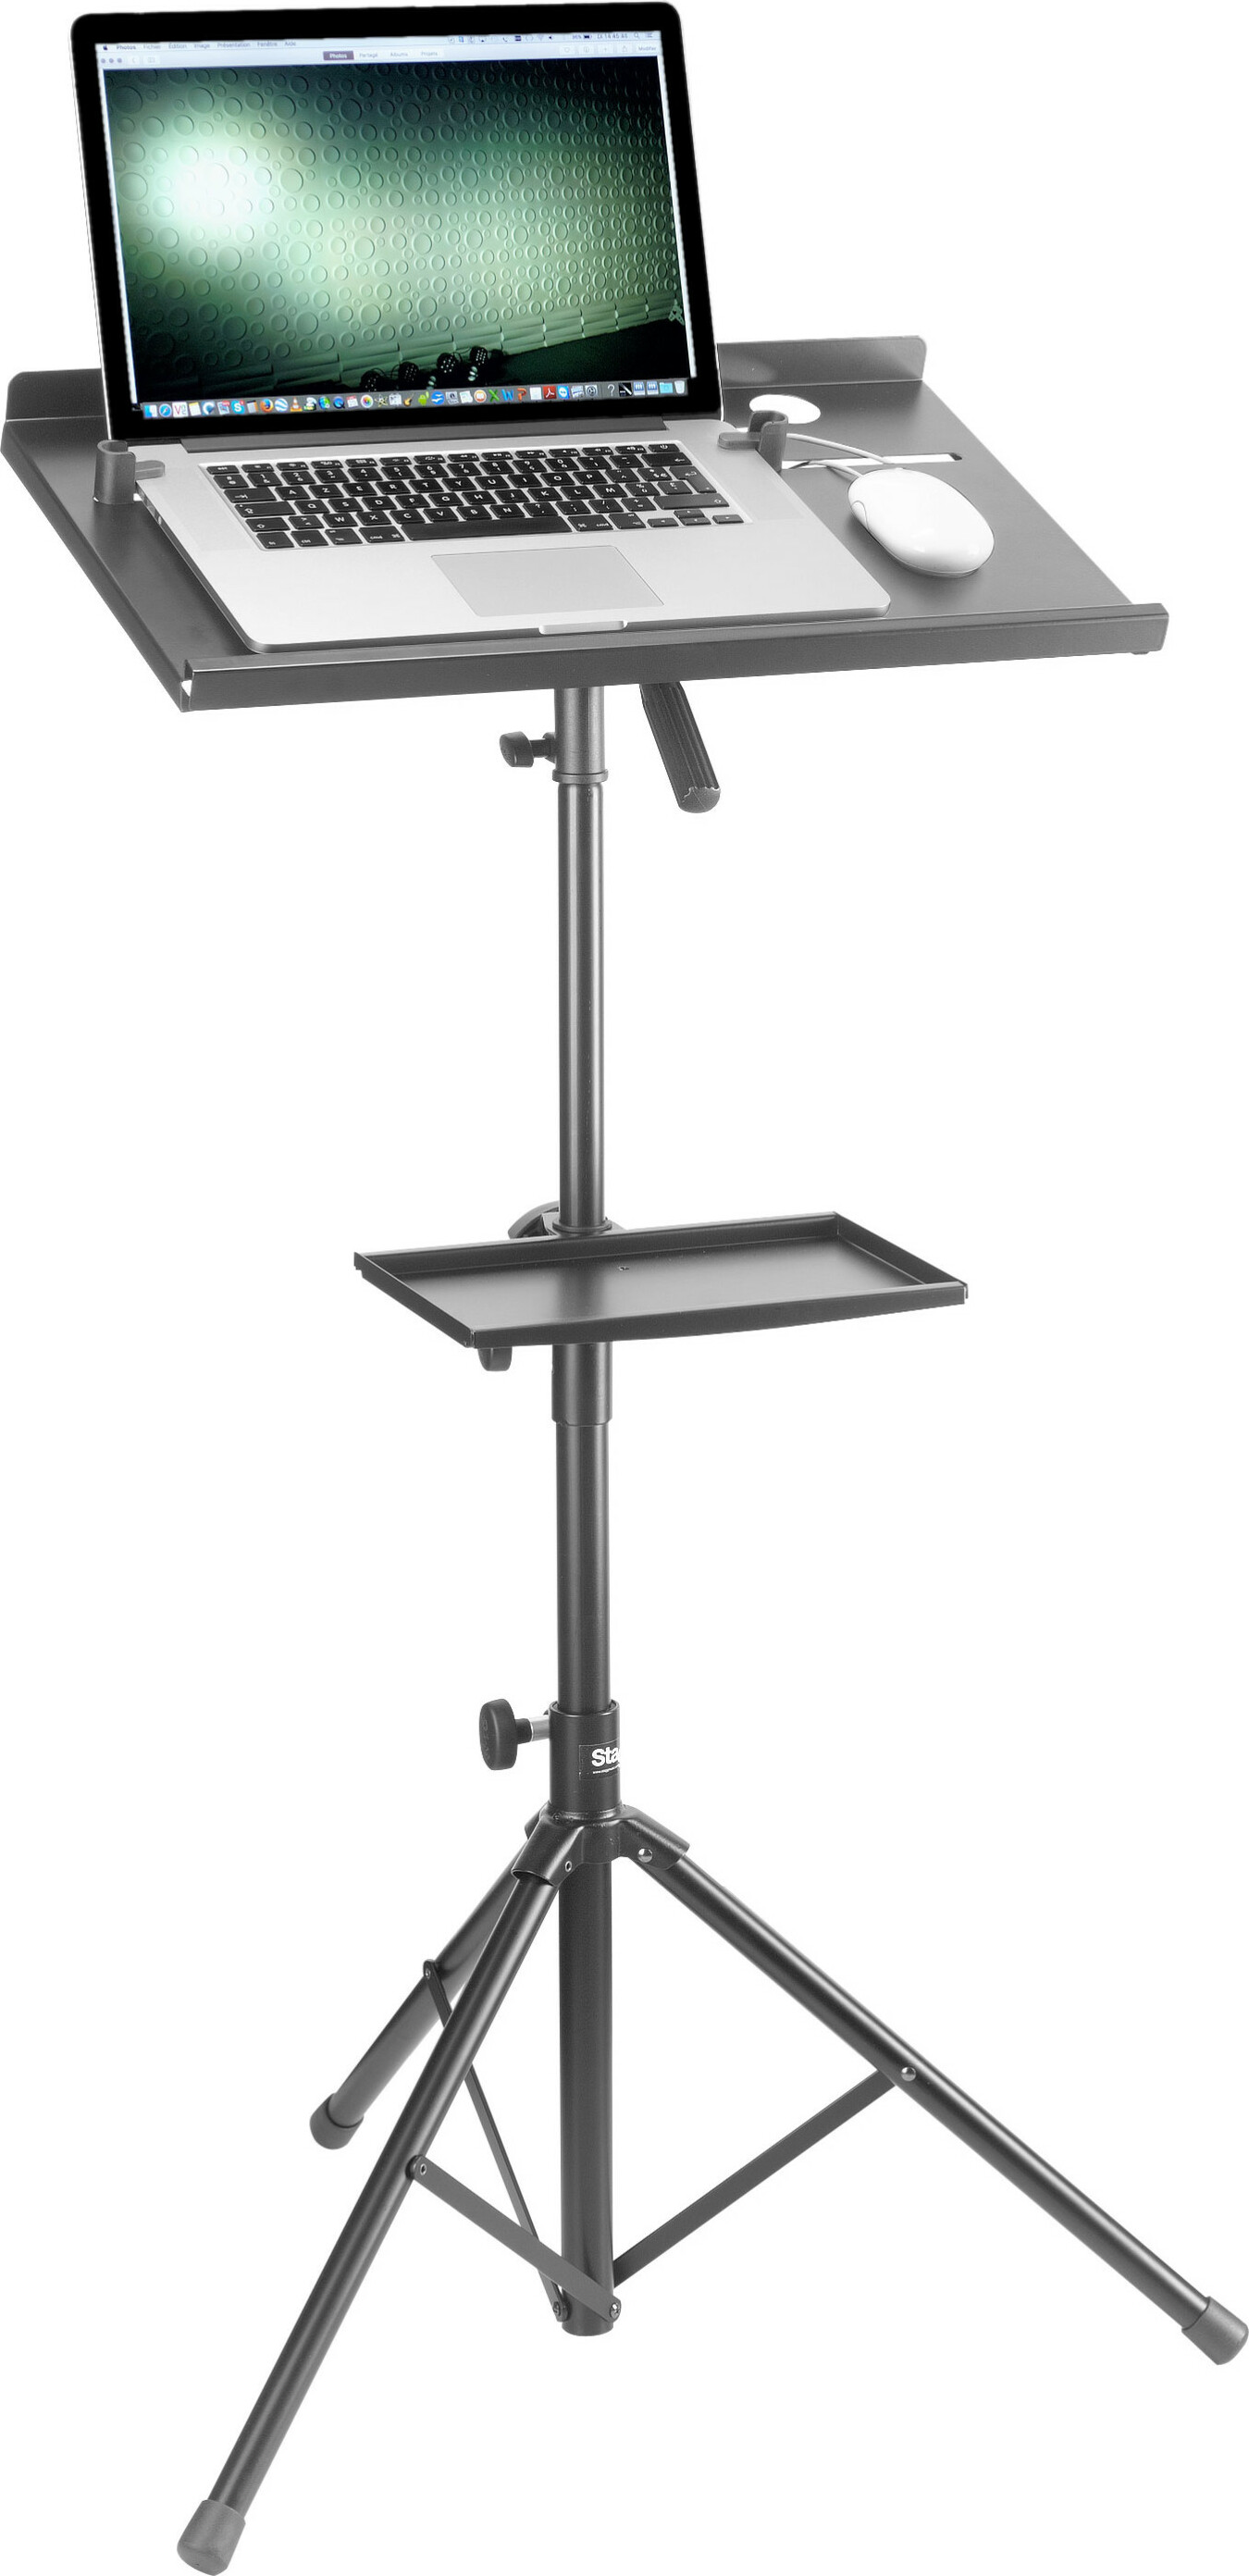 Stagg Computer Cos10bk - Music stand - Main picture